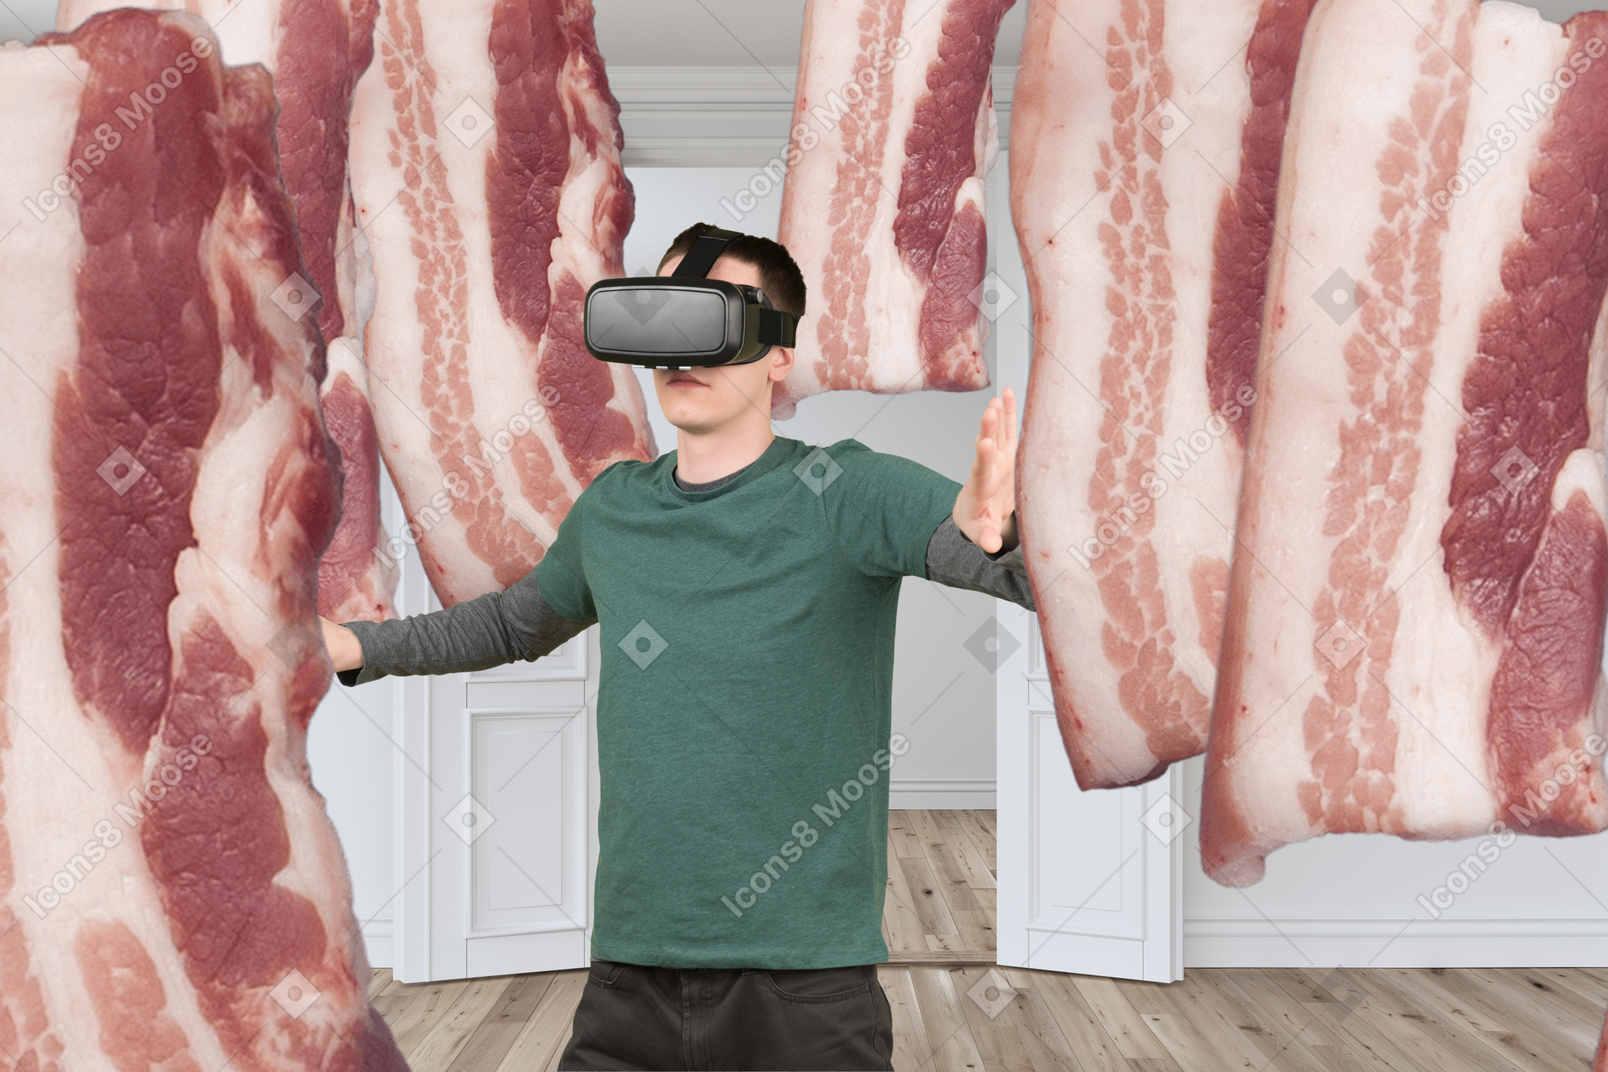 Man seeing bacon in vr goggles